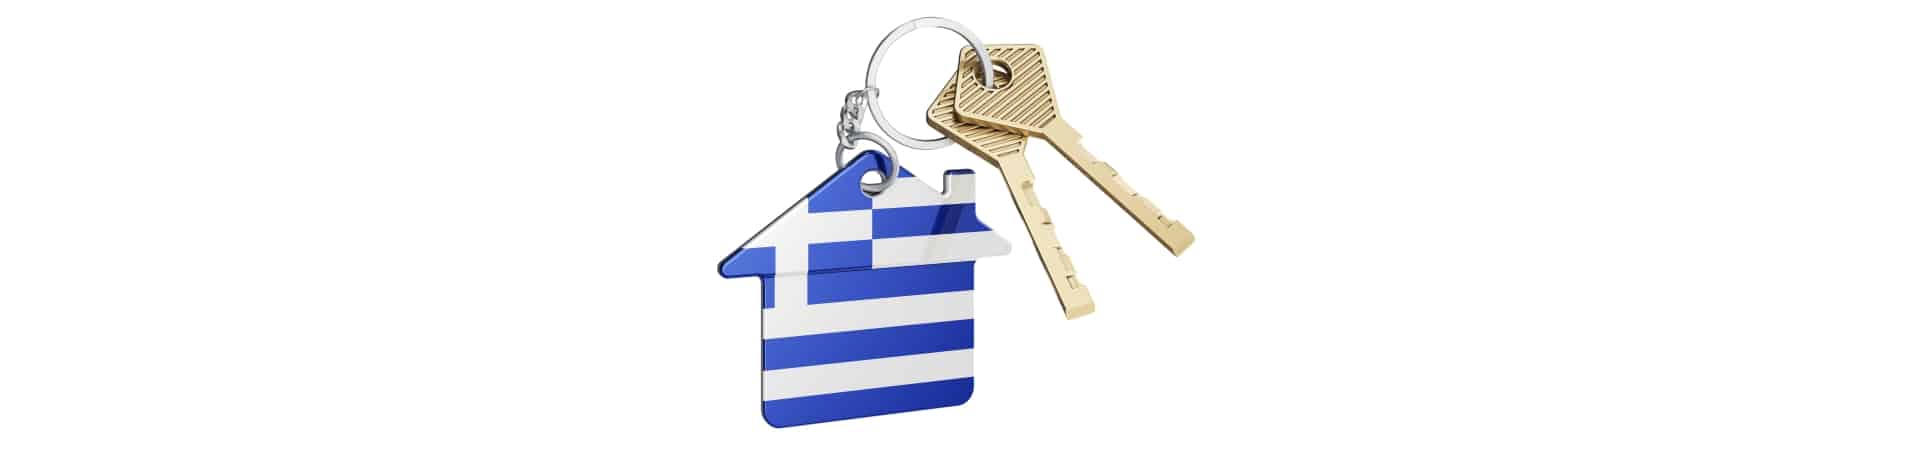 Power of attorney for buying or selling property in Greece